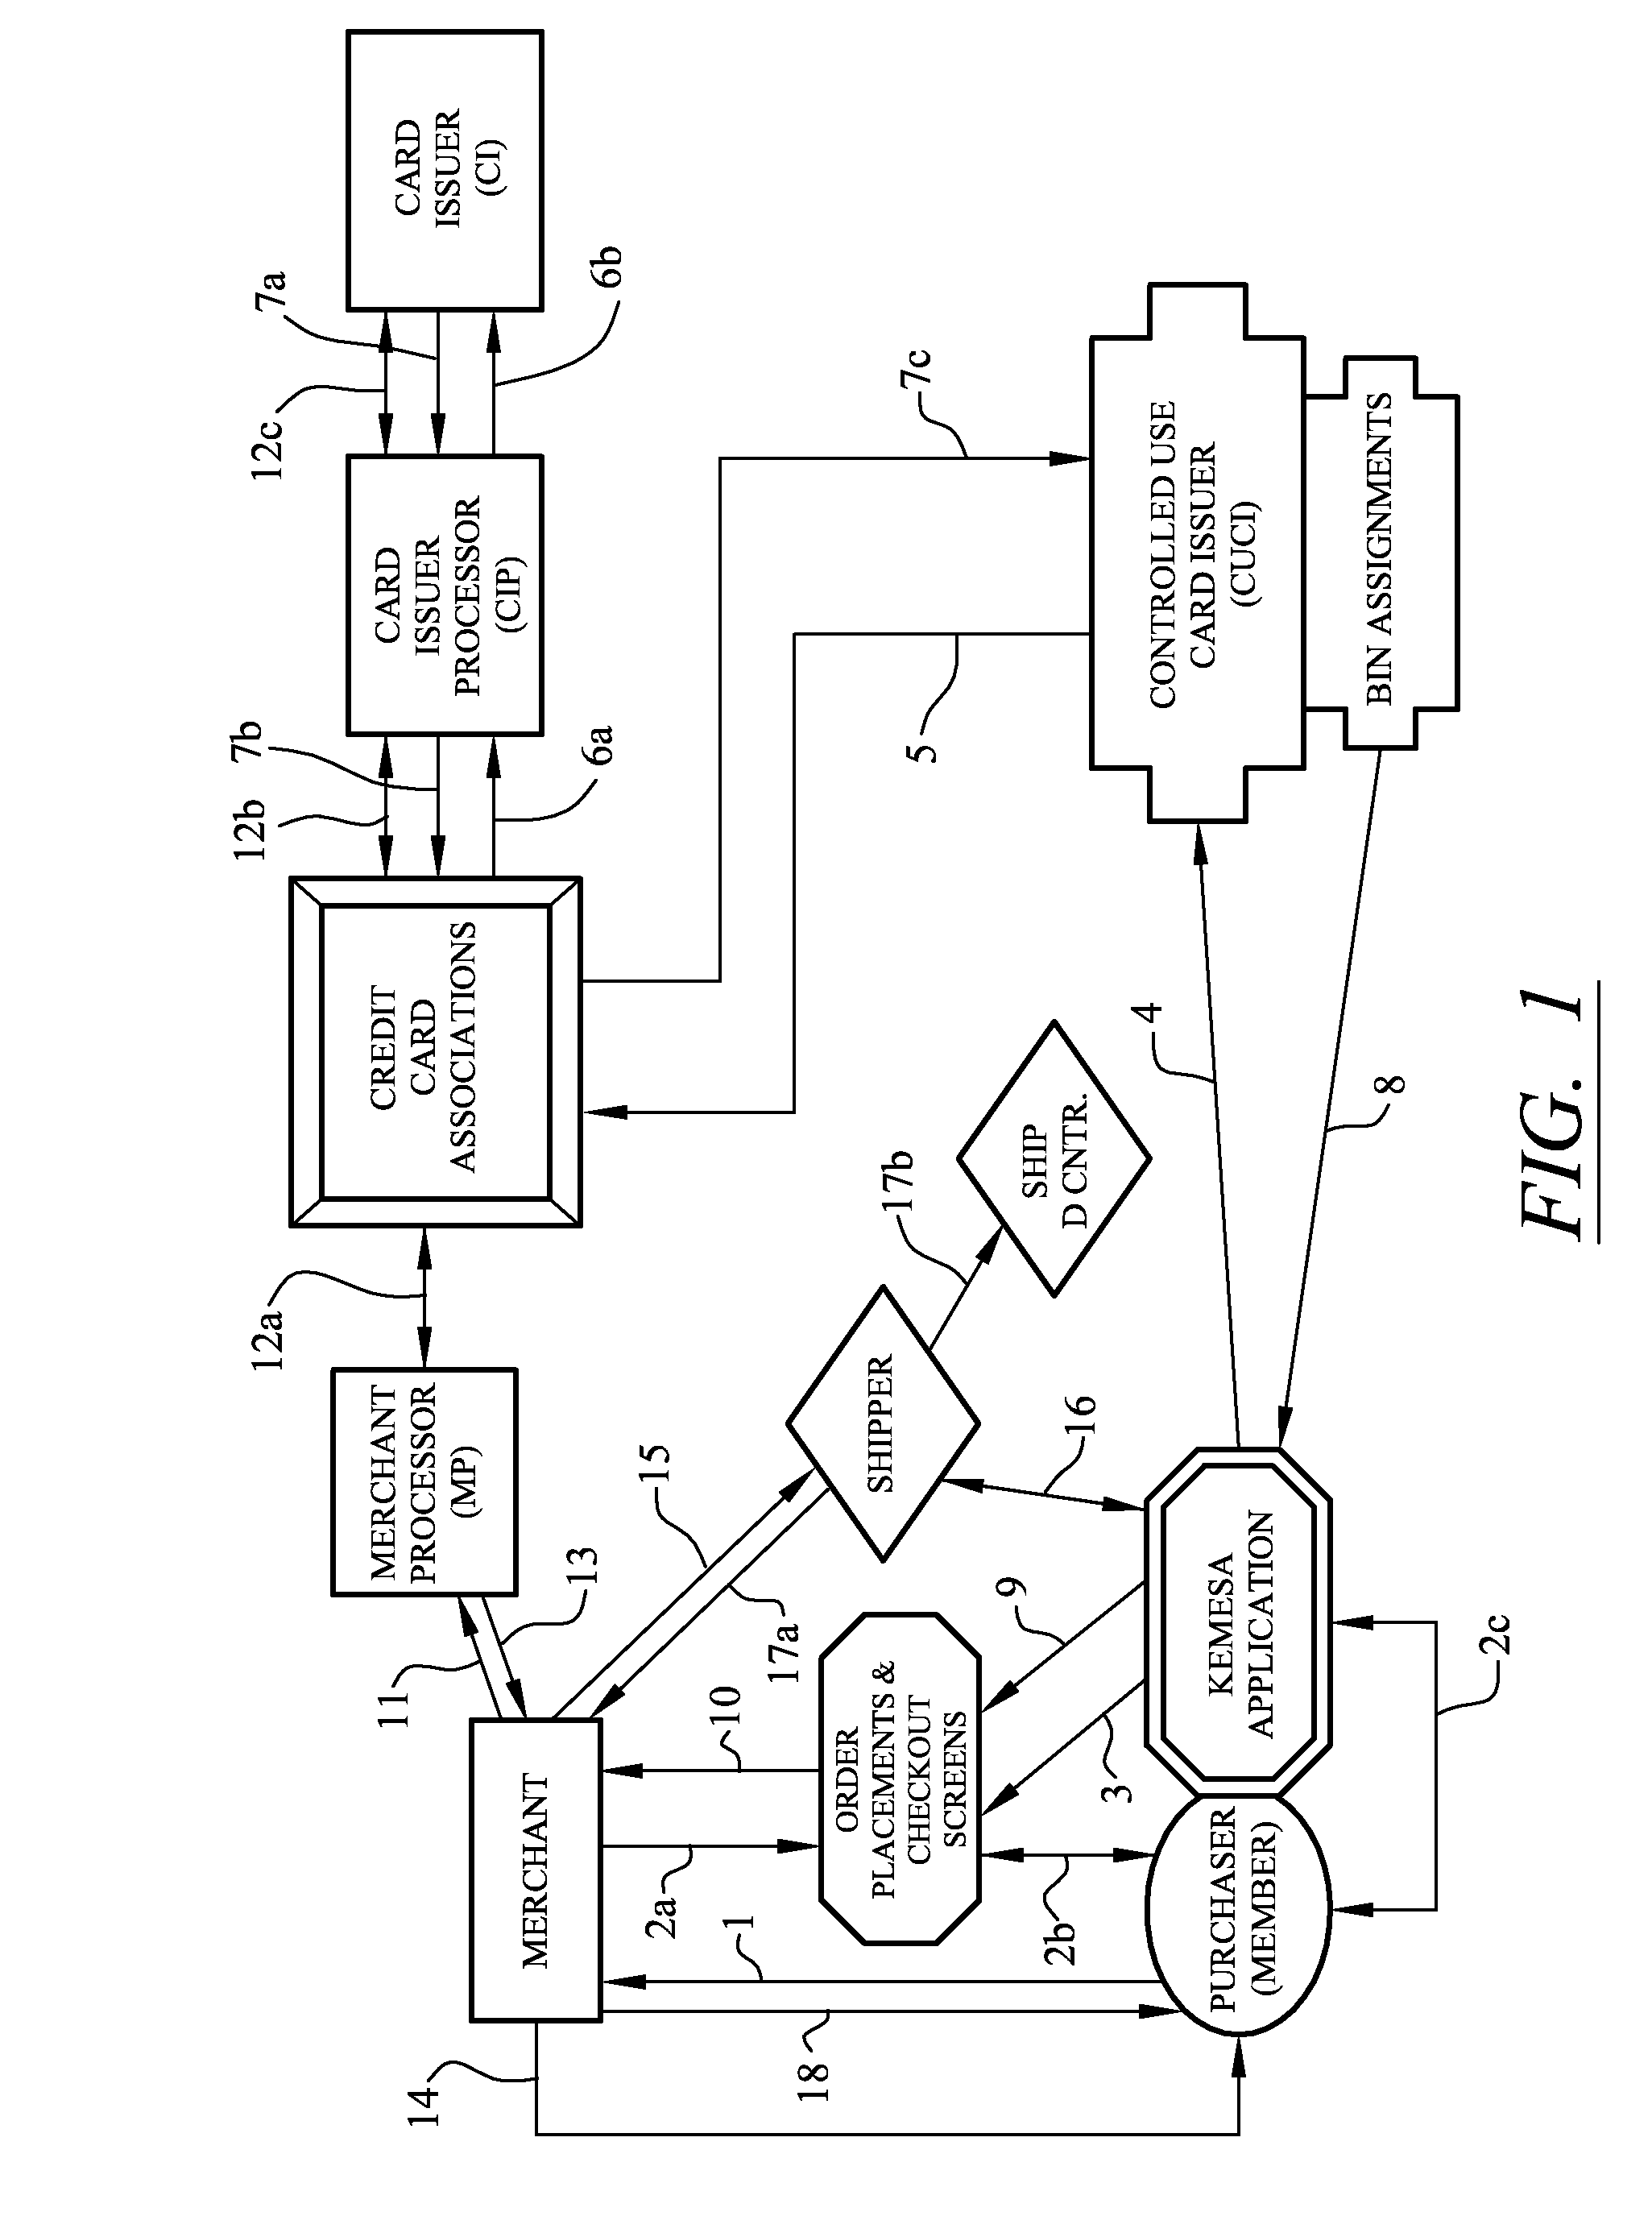 Identity theft and fraud protection system and method